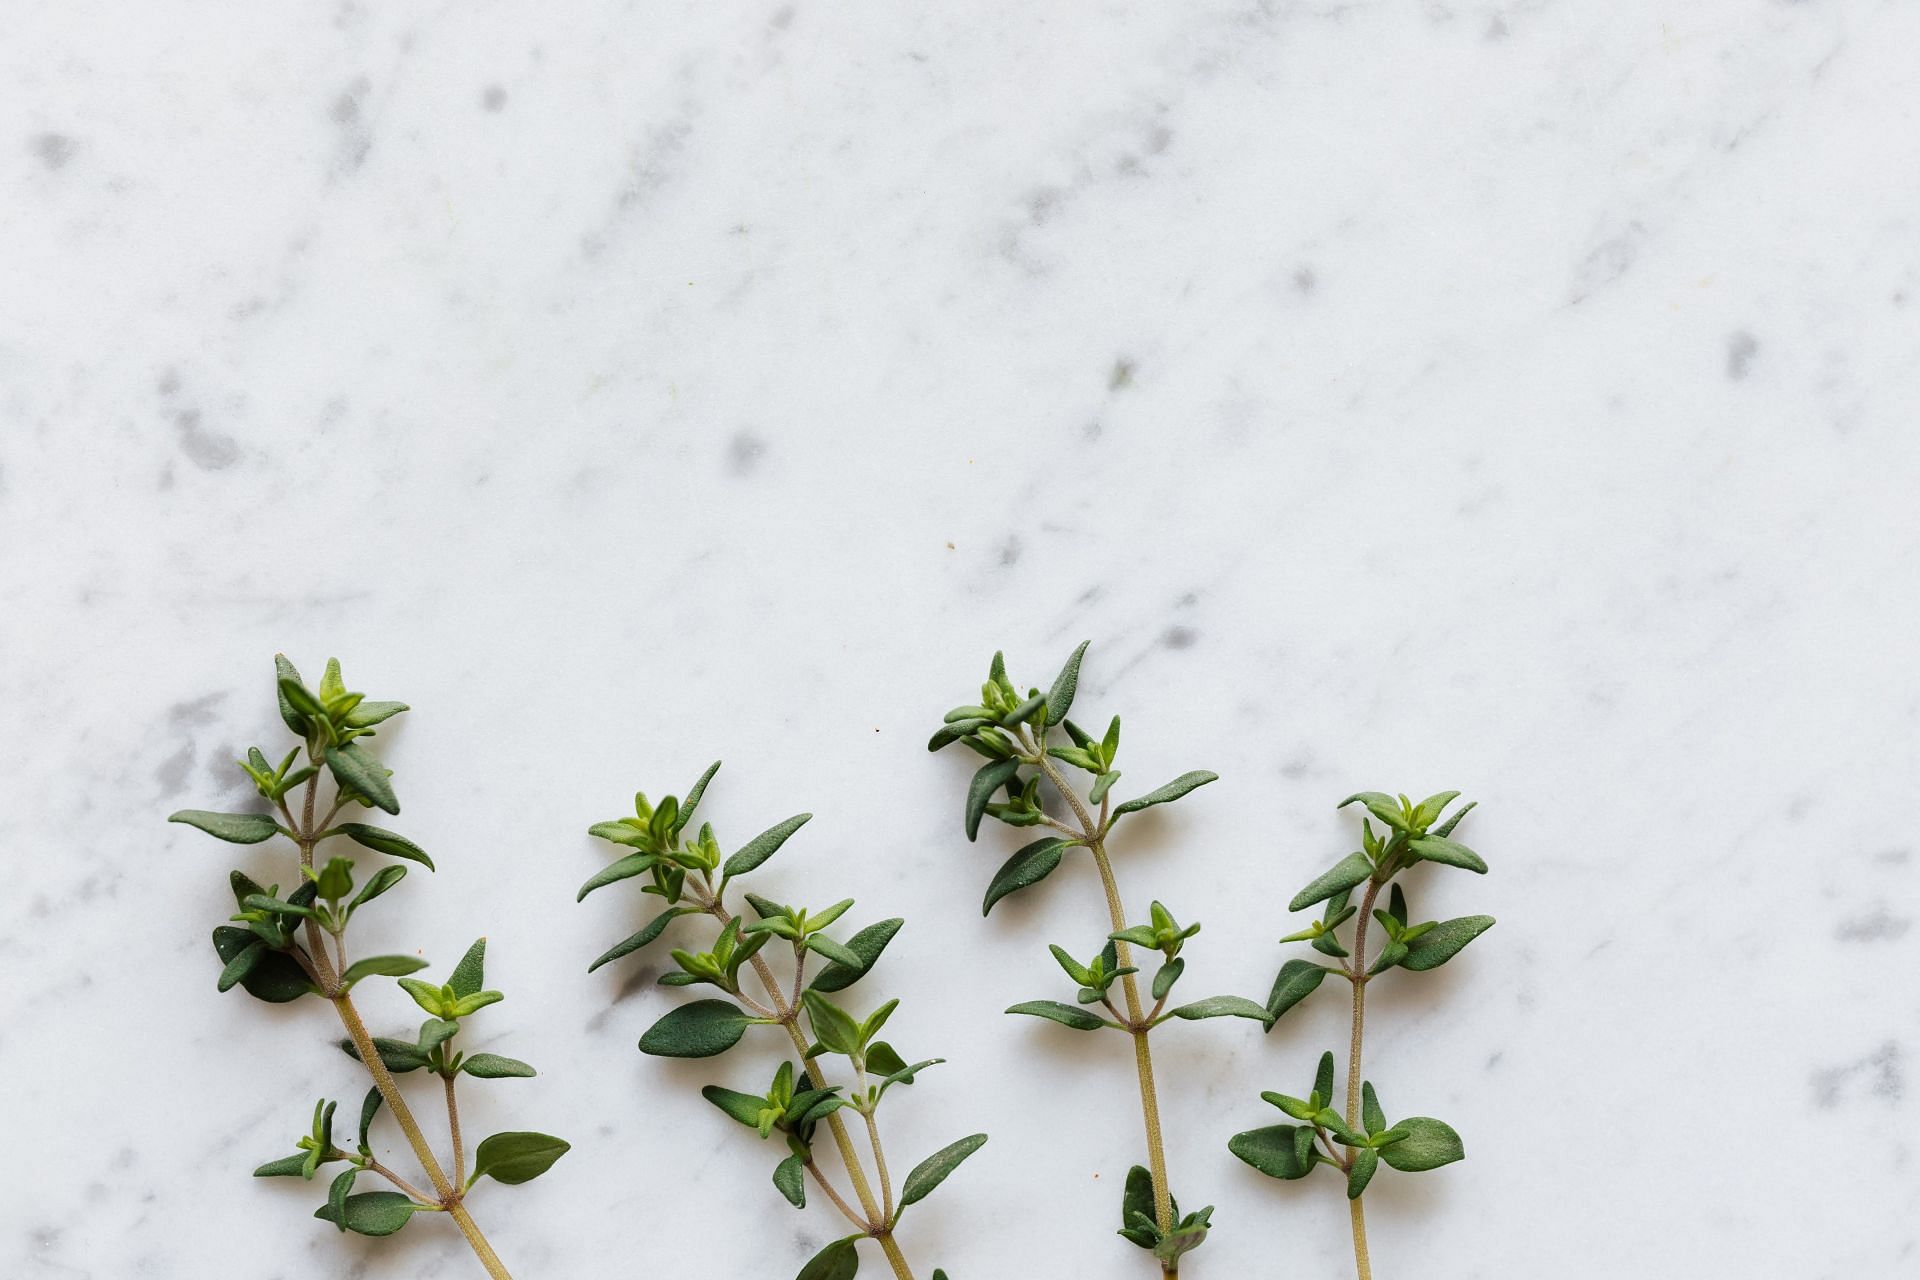 Importance of health benefits of thyme (image sourced via Pexels / Photo by karolina)